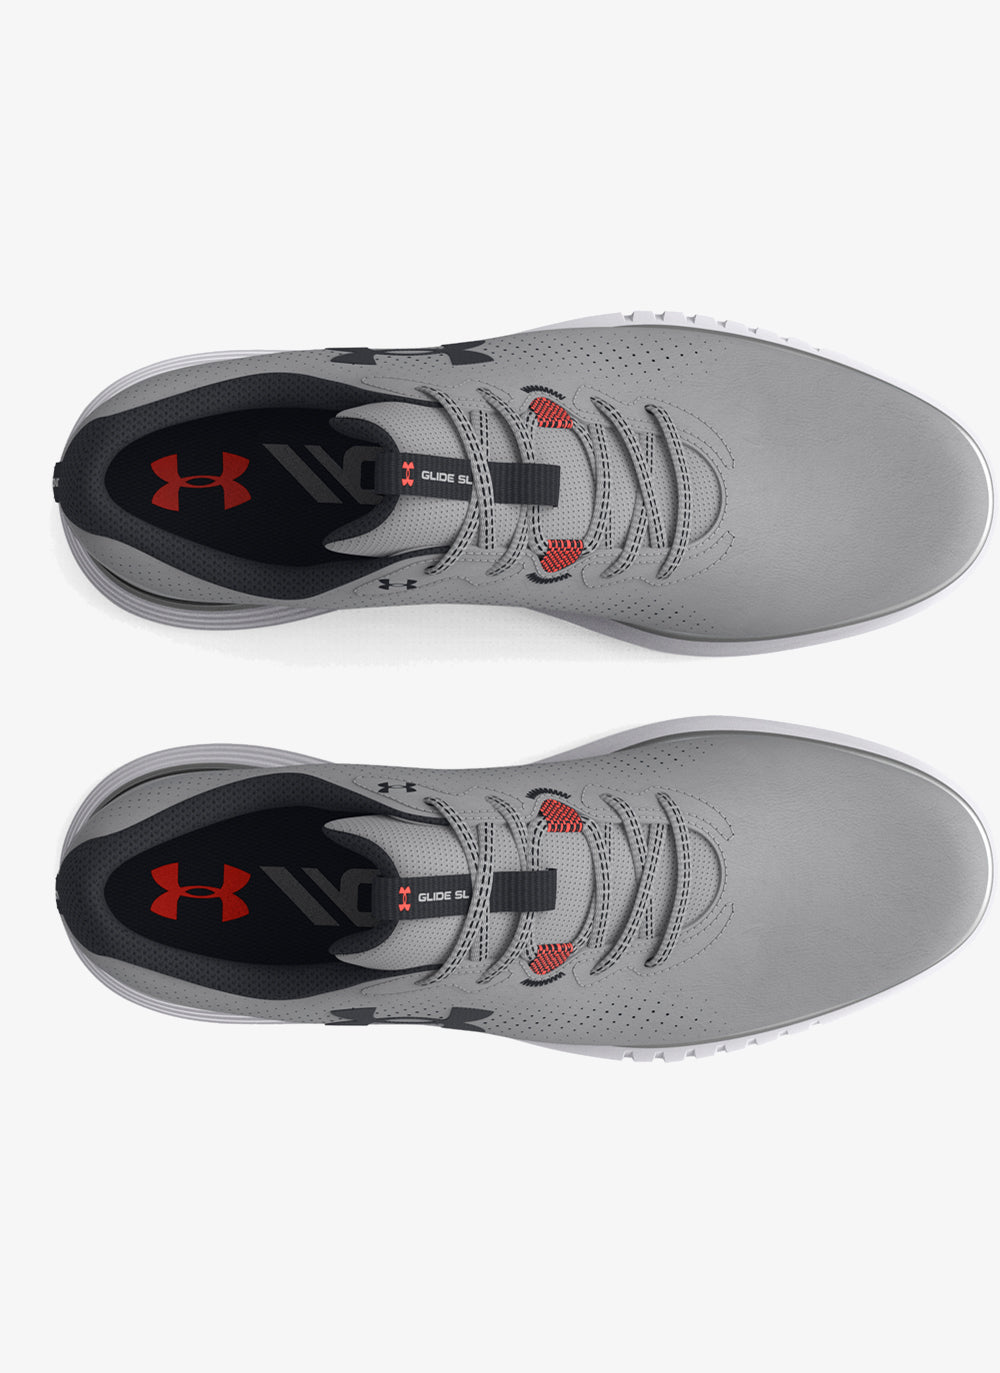 Under Armour Glide 2 SL Golf Shoes 3026402